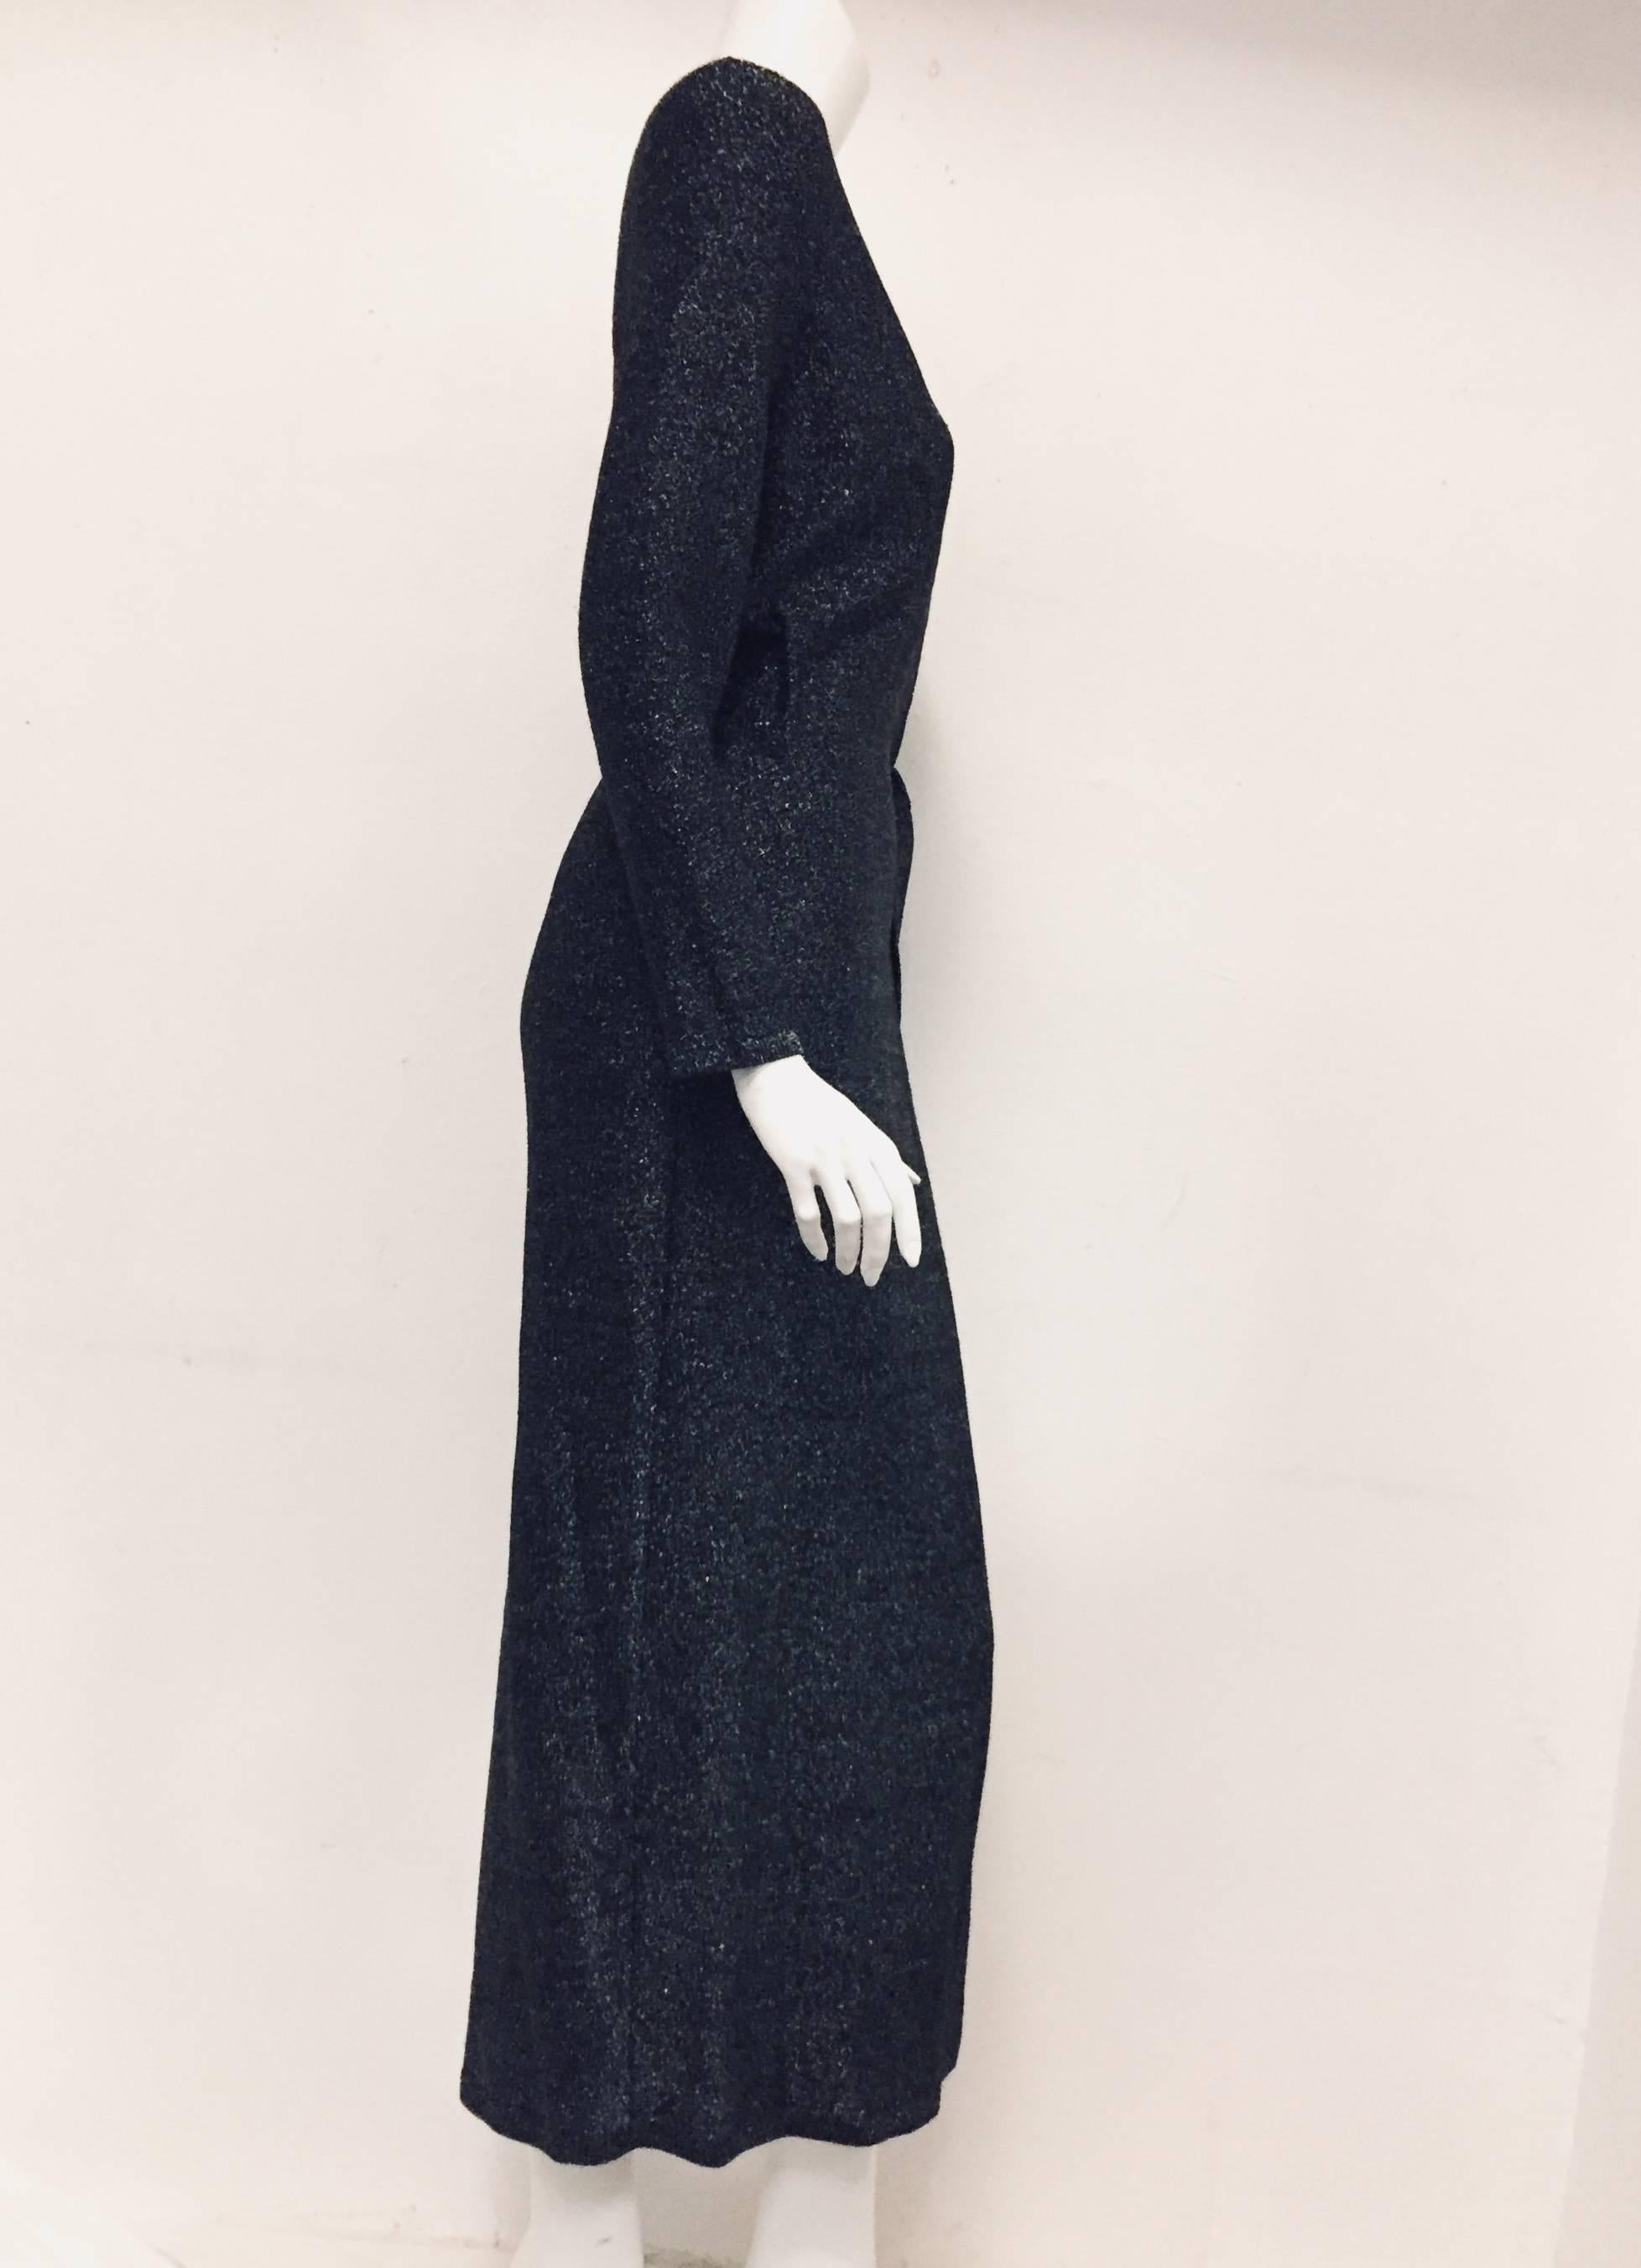 This Steve Fabrikant's gunmetal knit lame wrap dress will make heads turn as you glide into any room!   This never worn, in excellent condition, lame dress created by Steve Fabrikant the king of knit in the 80's is fabulous for any event you will be